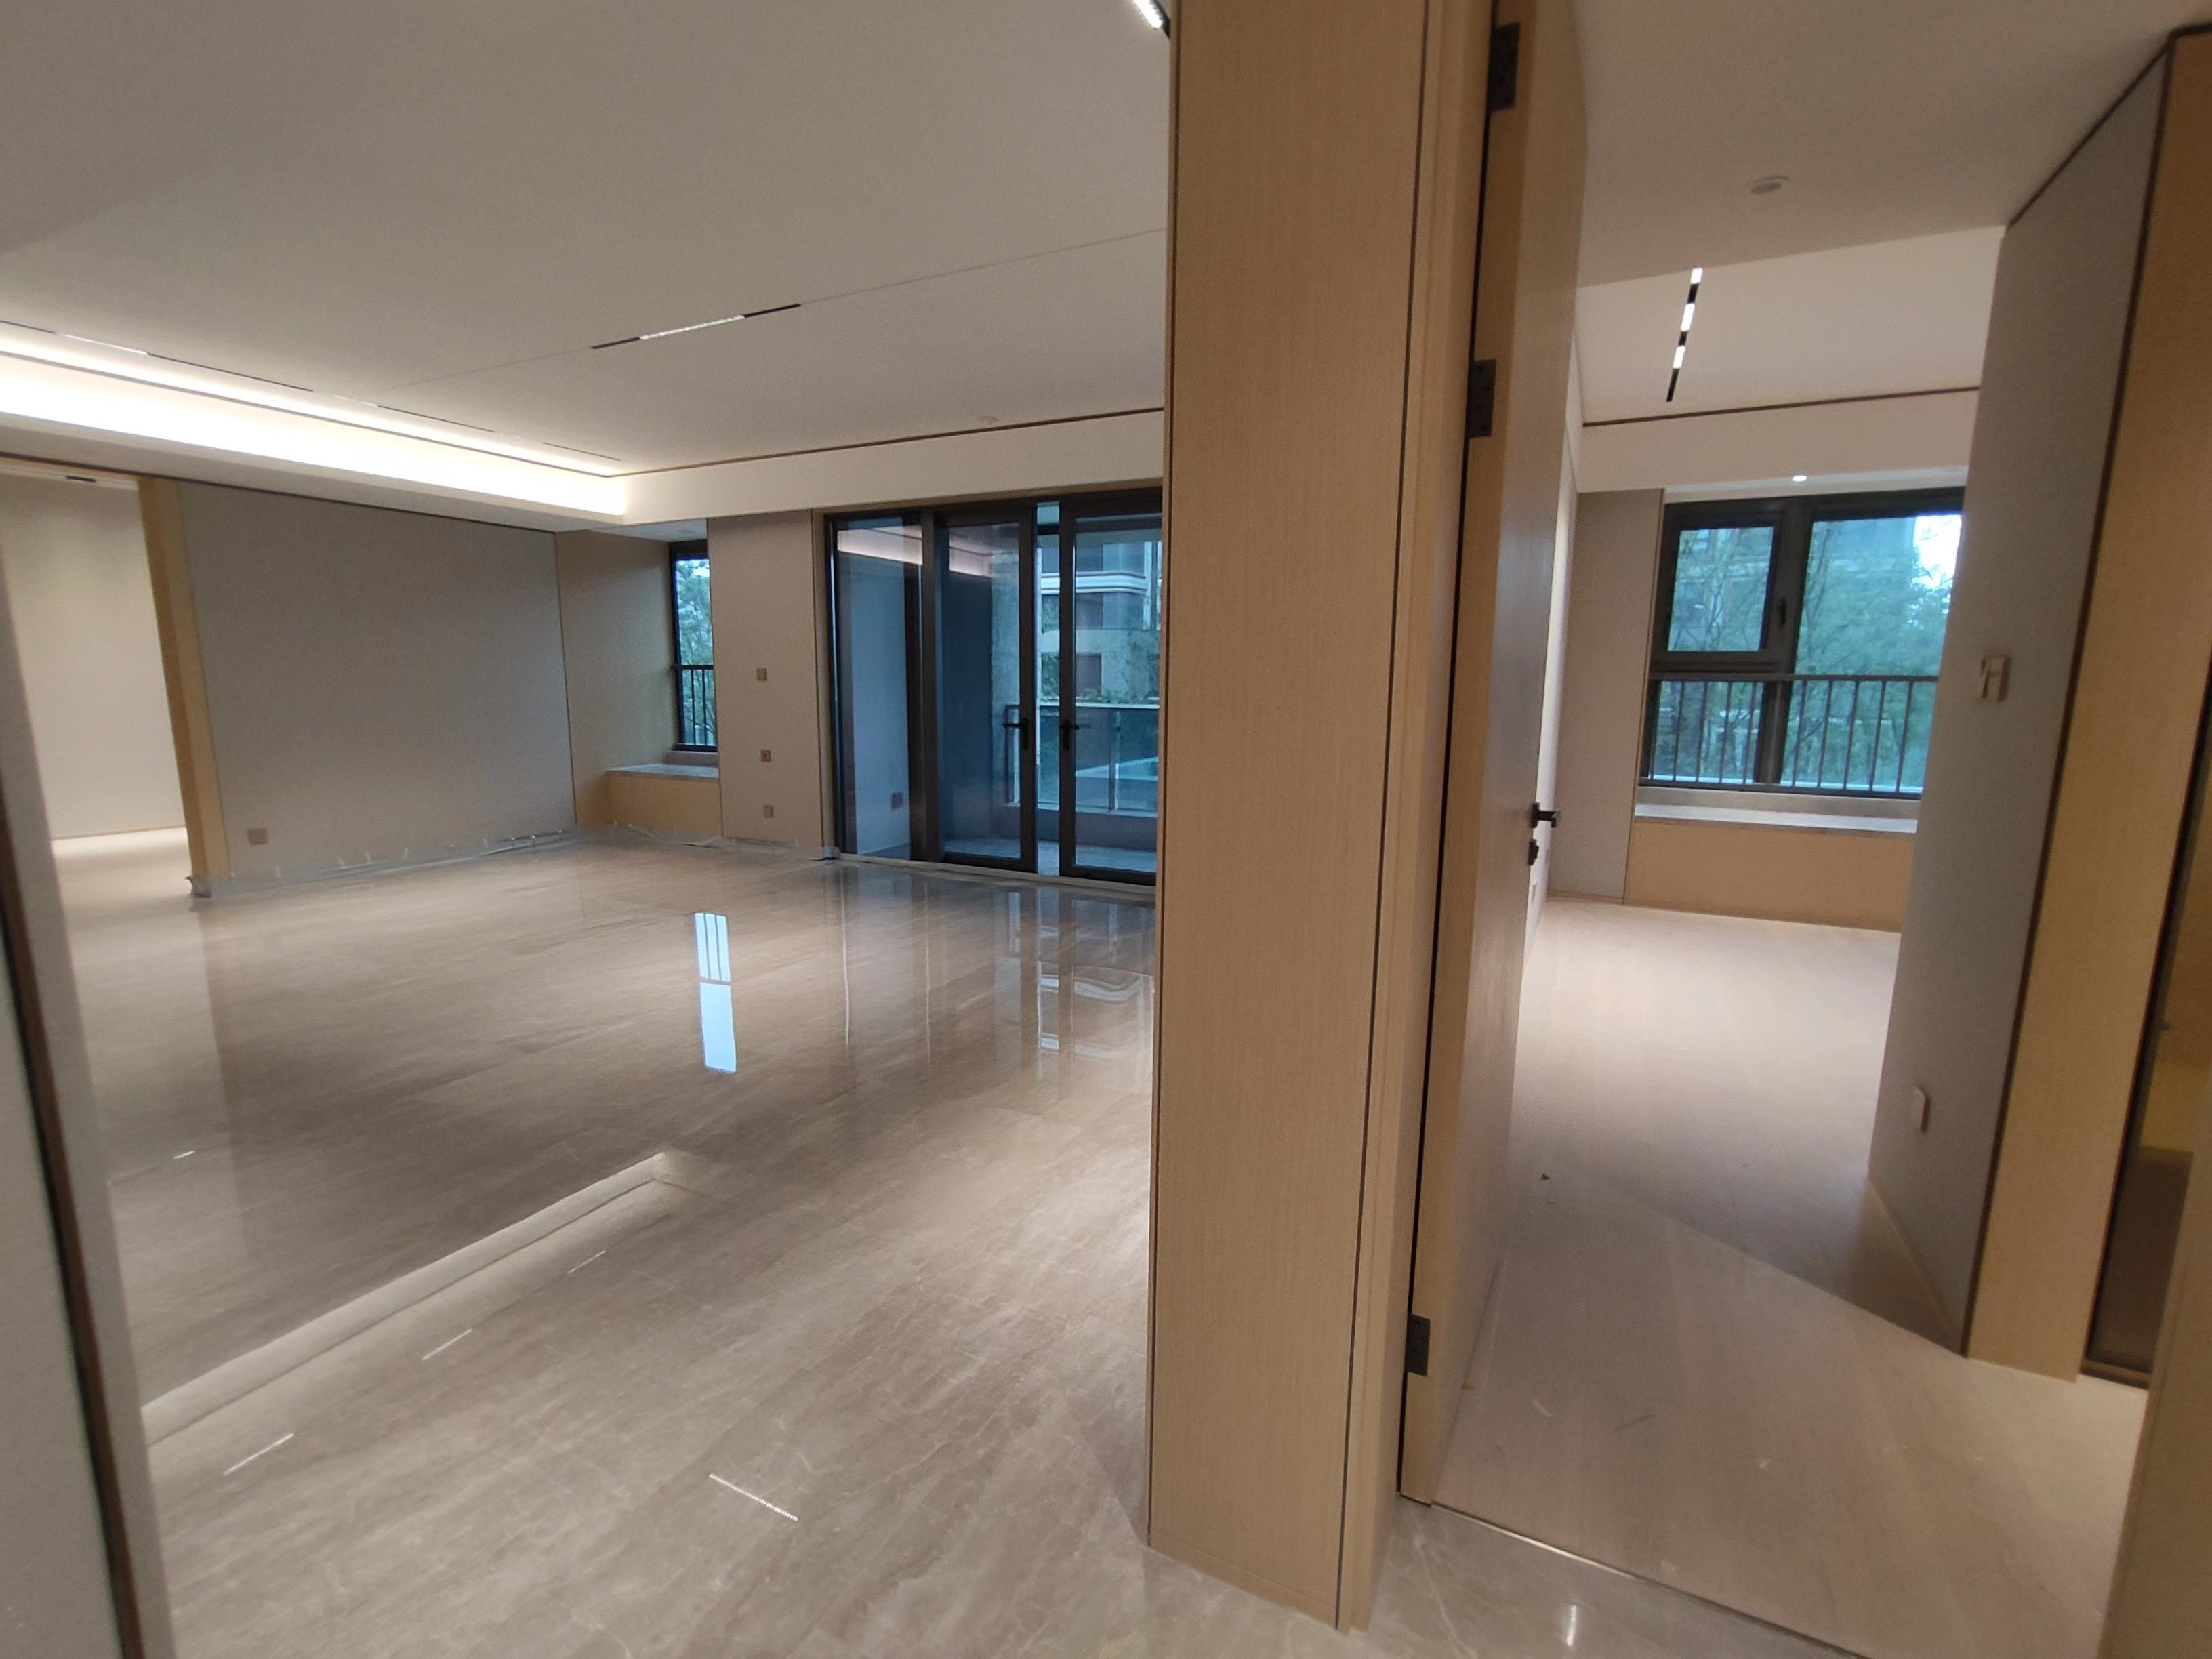 Big rooms Brand-new High-end 3BR Riverside Apartment for Rent near Shanghai’s Lujiazui